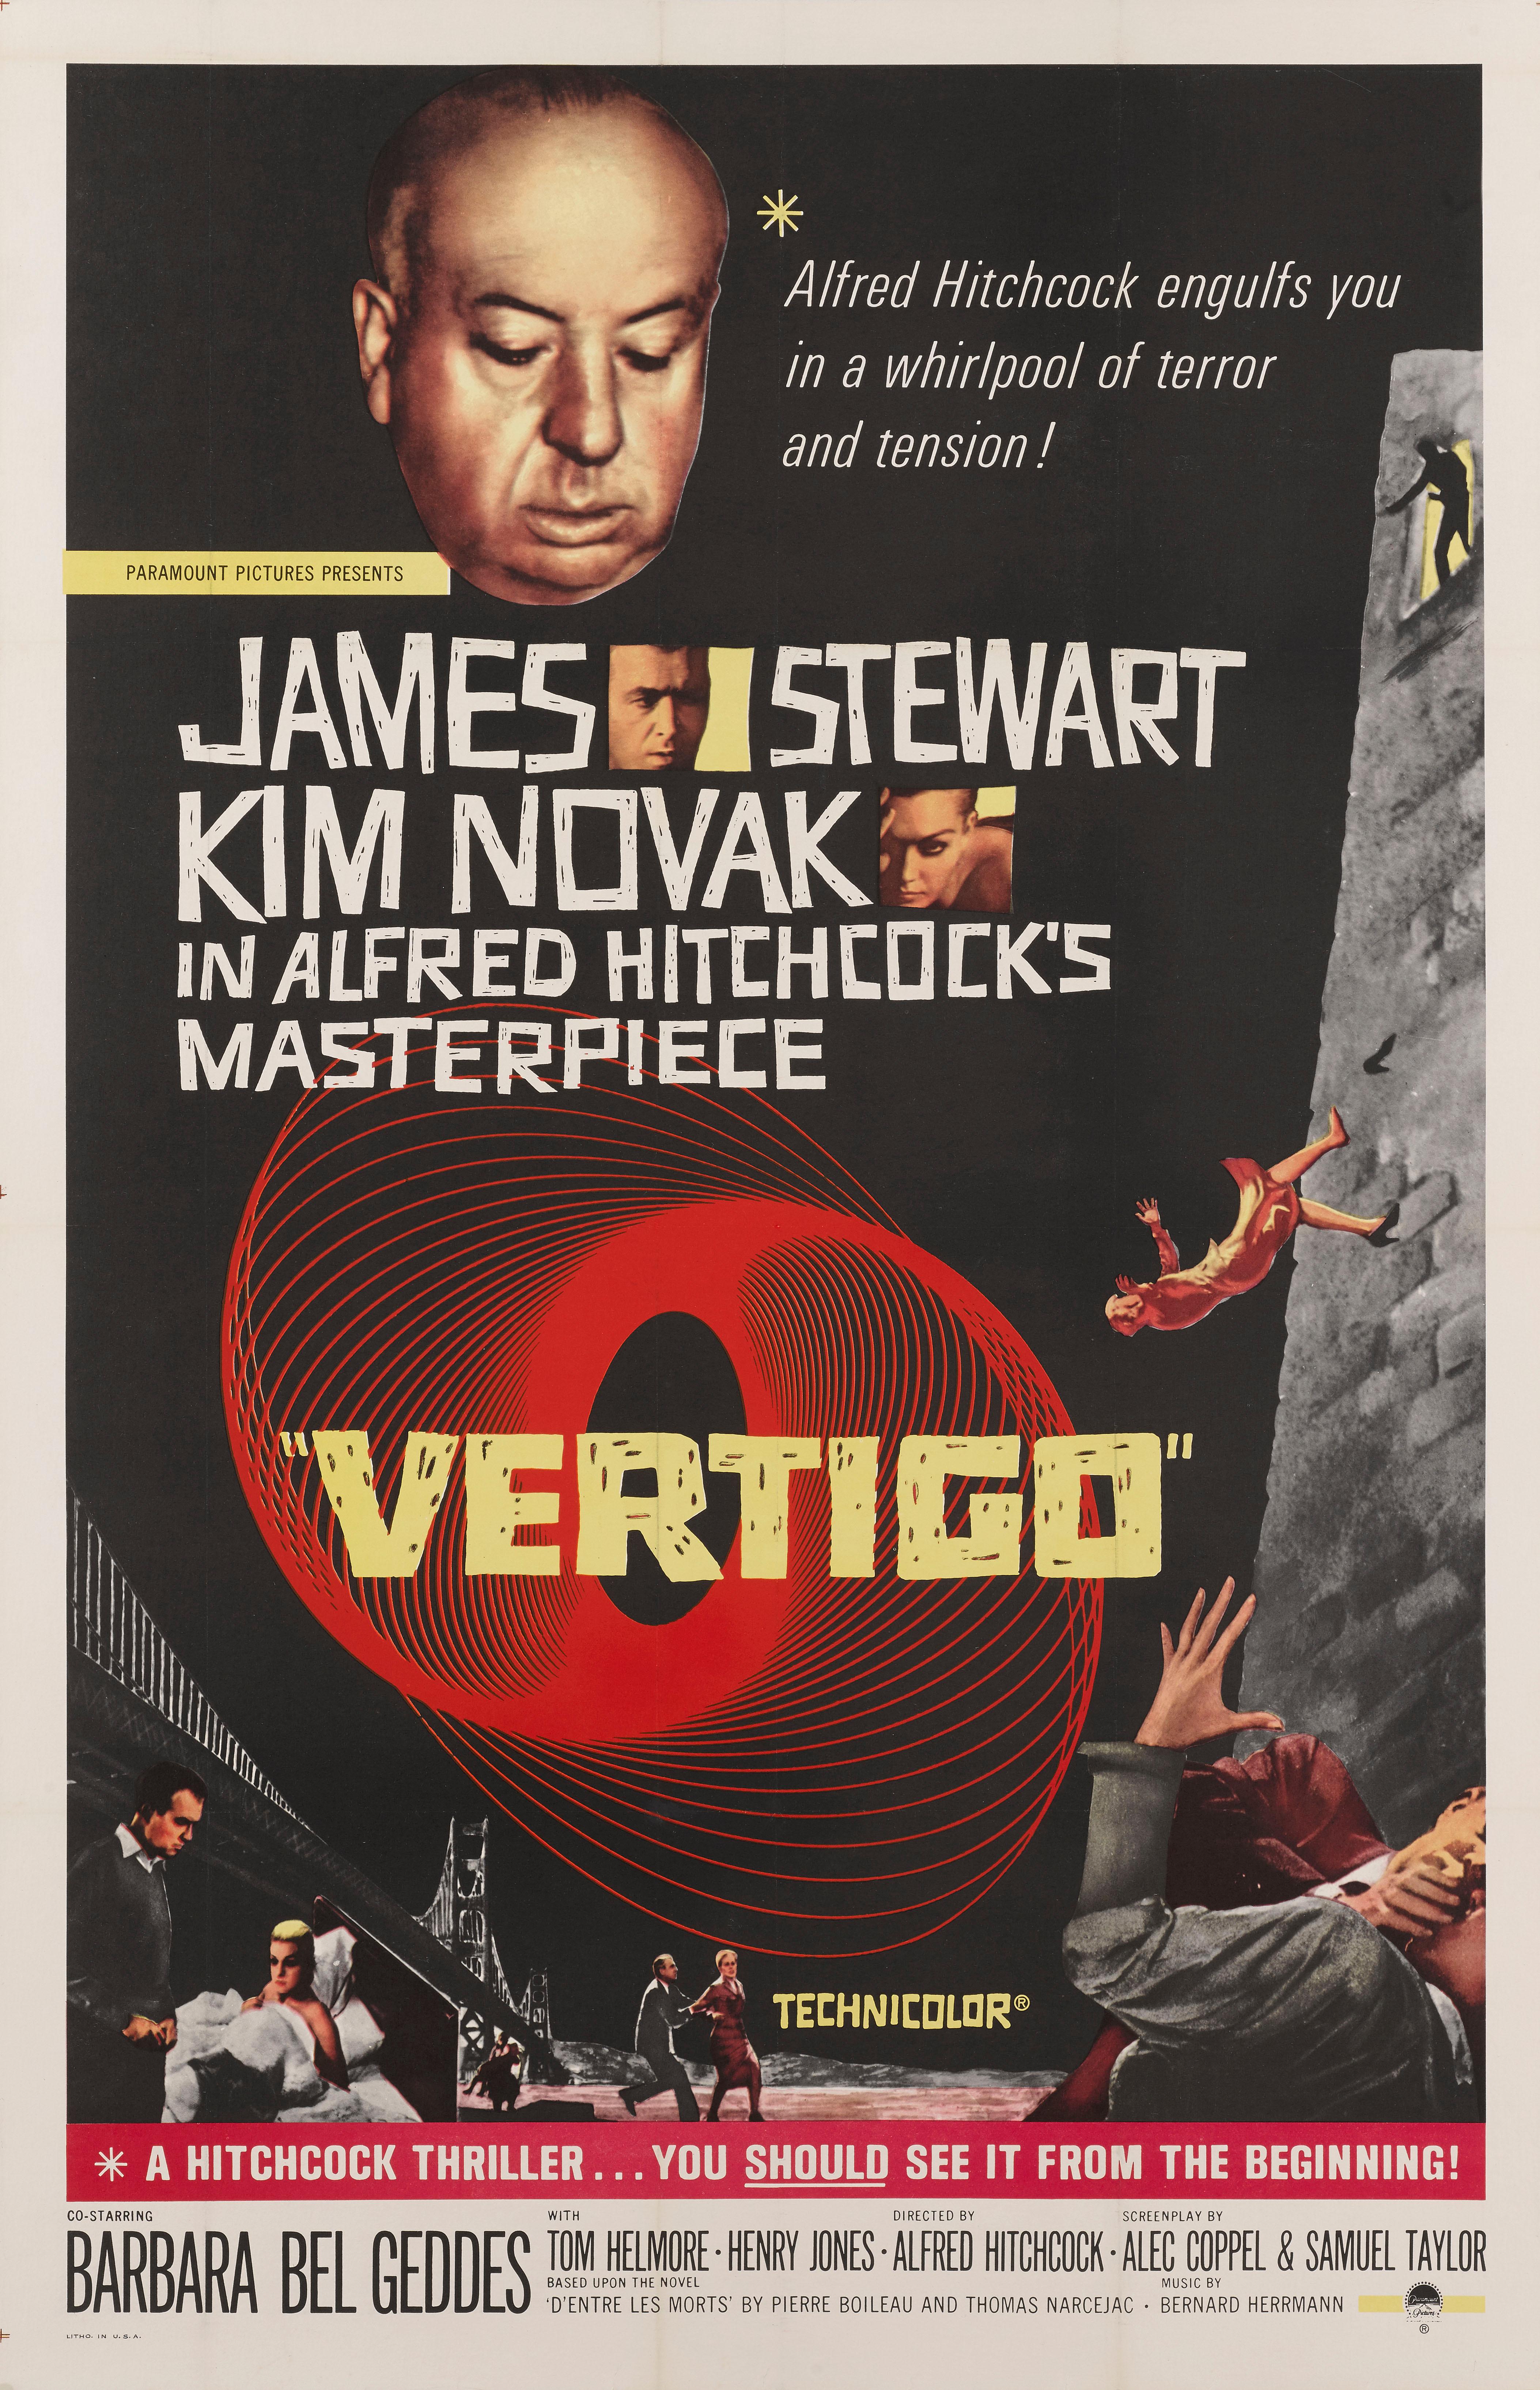 Original US film poster from (1960) 41 x 27 in. (104 x 69 cm)
This poster would have been used outside the cinema at the films Re-release in 1960.
This is a Classic Psychological thriller directed and produced by Alfred Hitchcock.
The film is